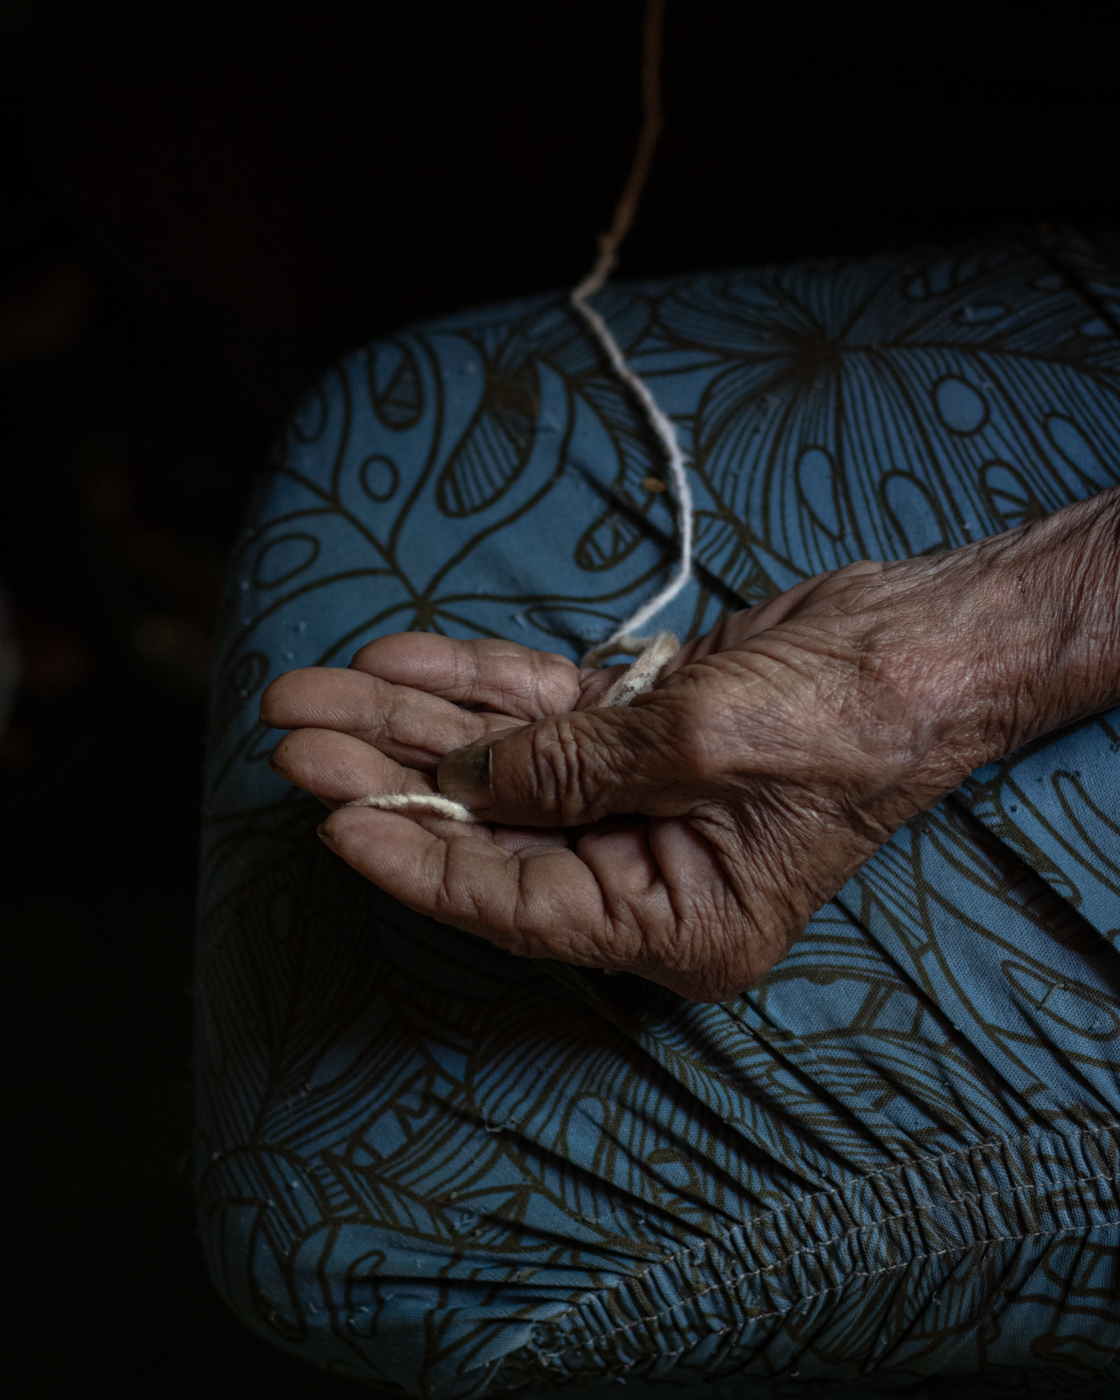 Maria Teixeira shows the string used to measure whether or not one is suffering from "espinhela caída". The same string is used in the healing process.